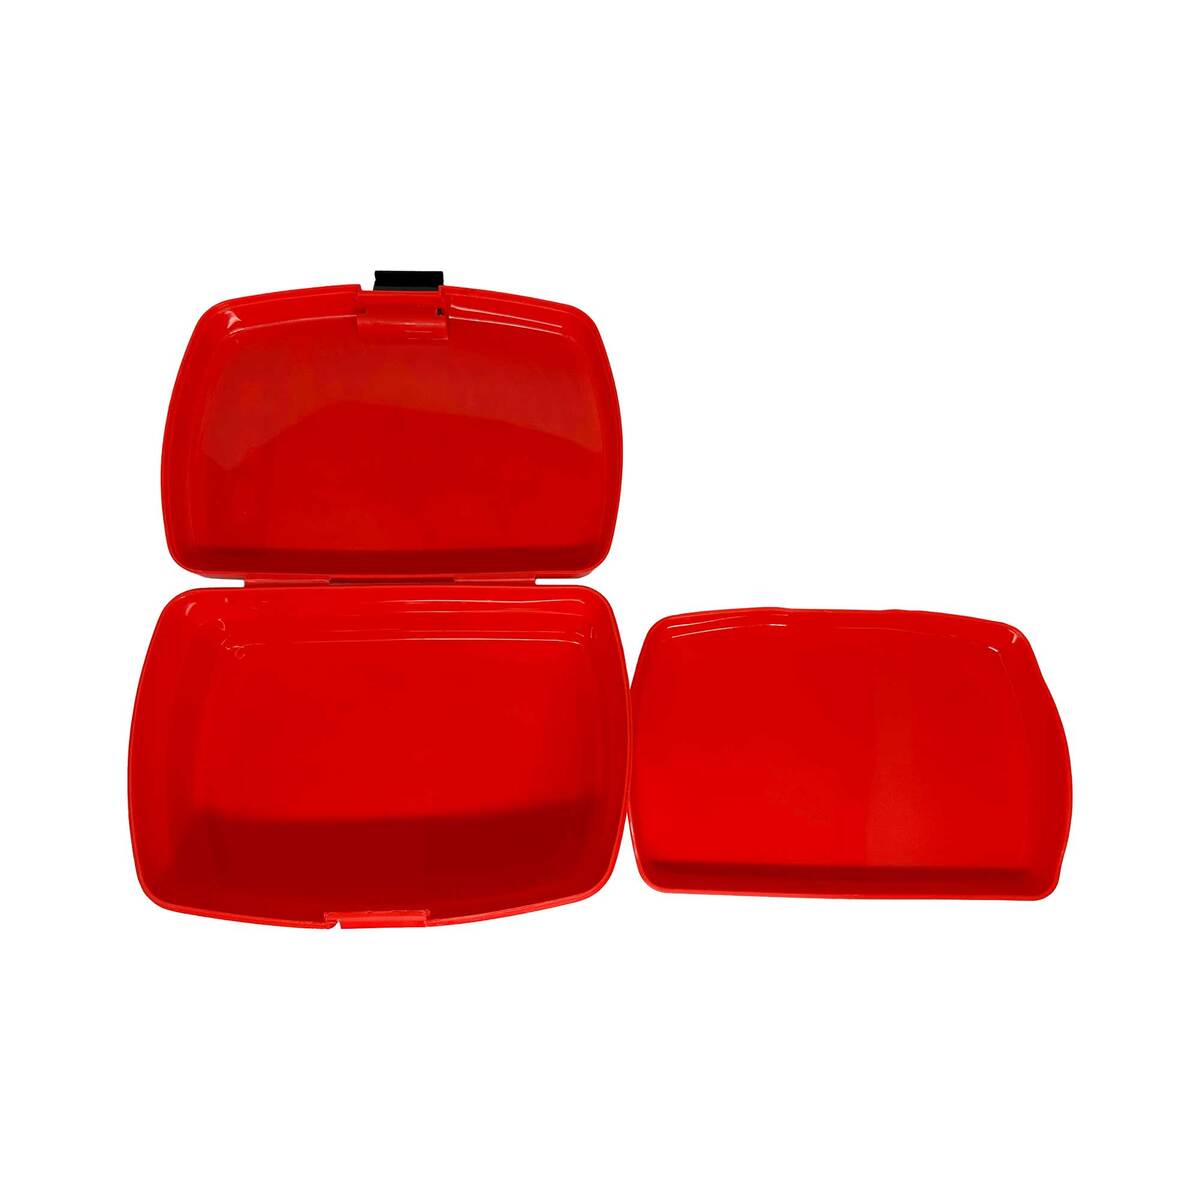 The Flash Sandwich Boxes With Inner | School Supplies | Halabh.com